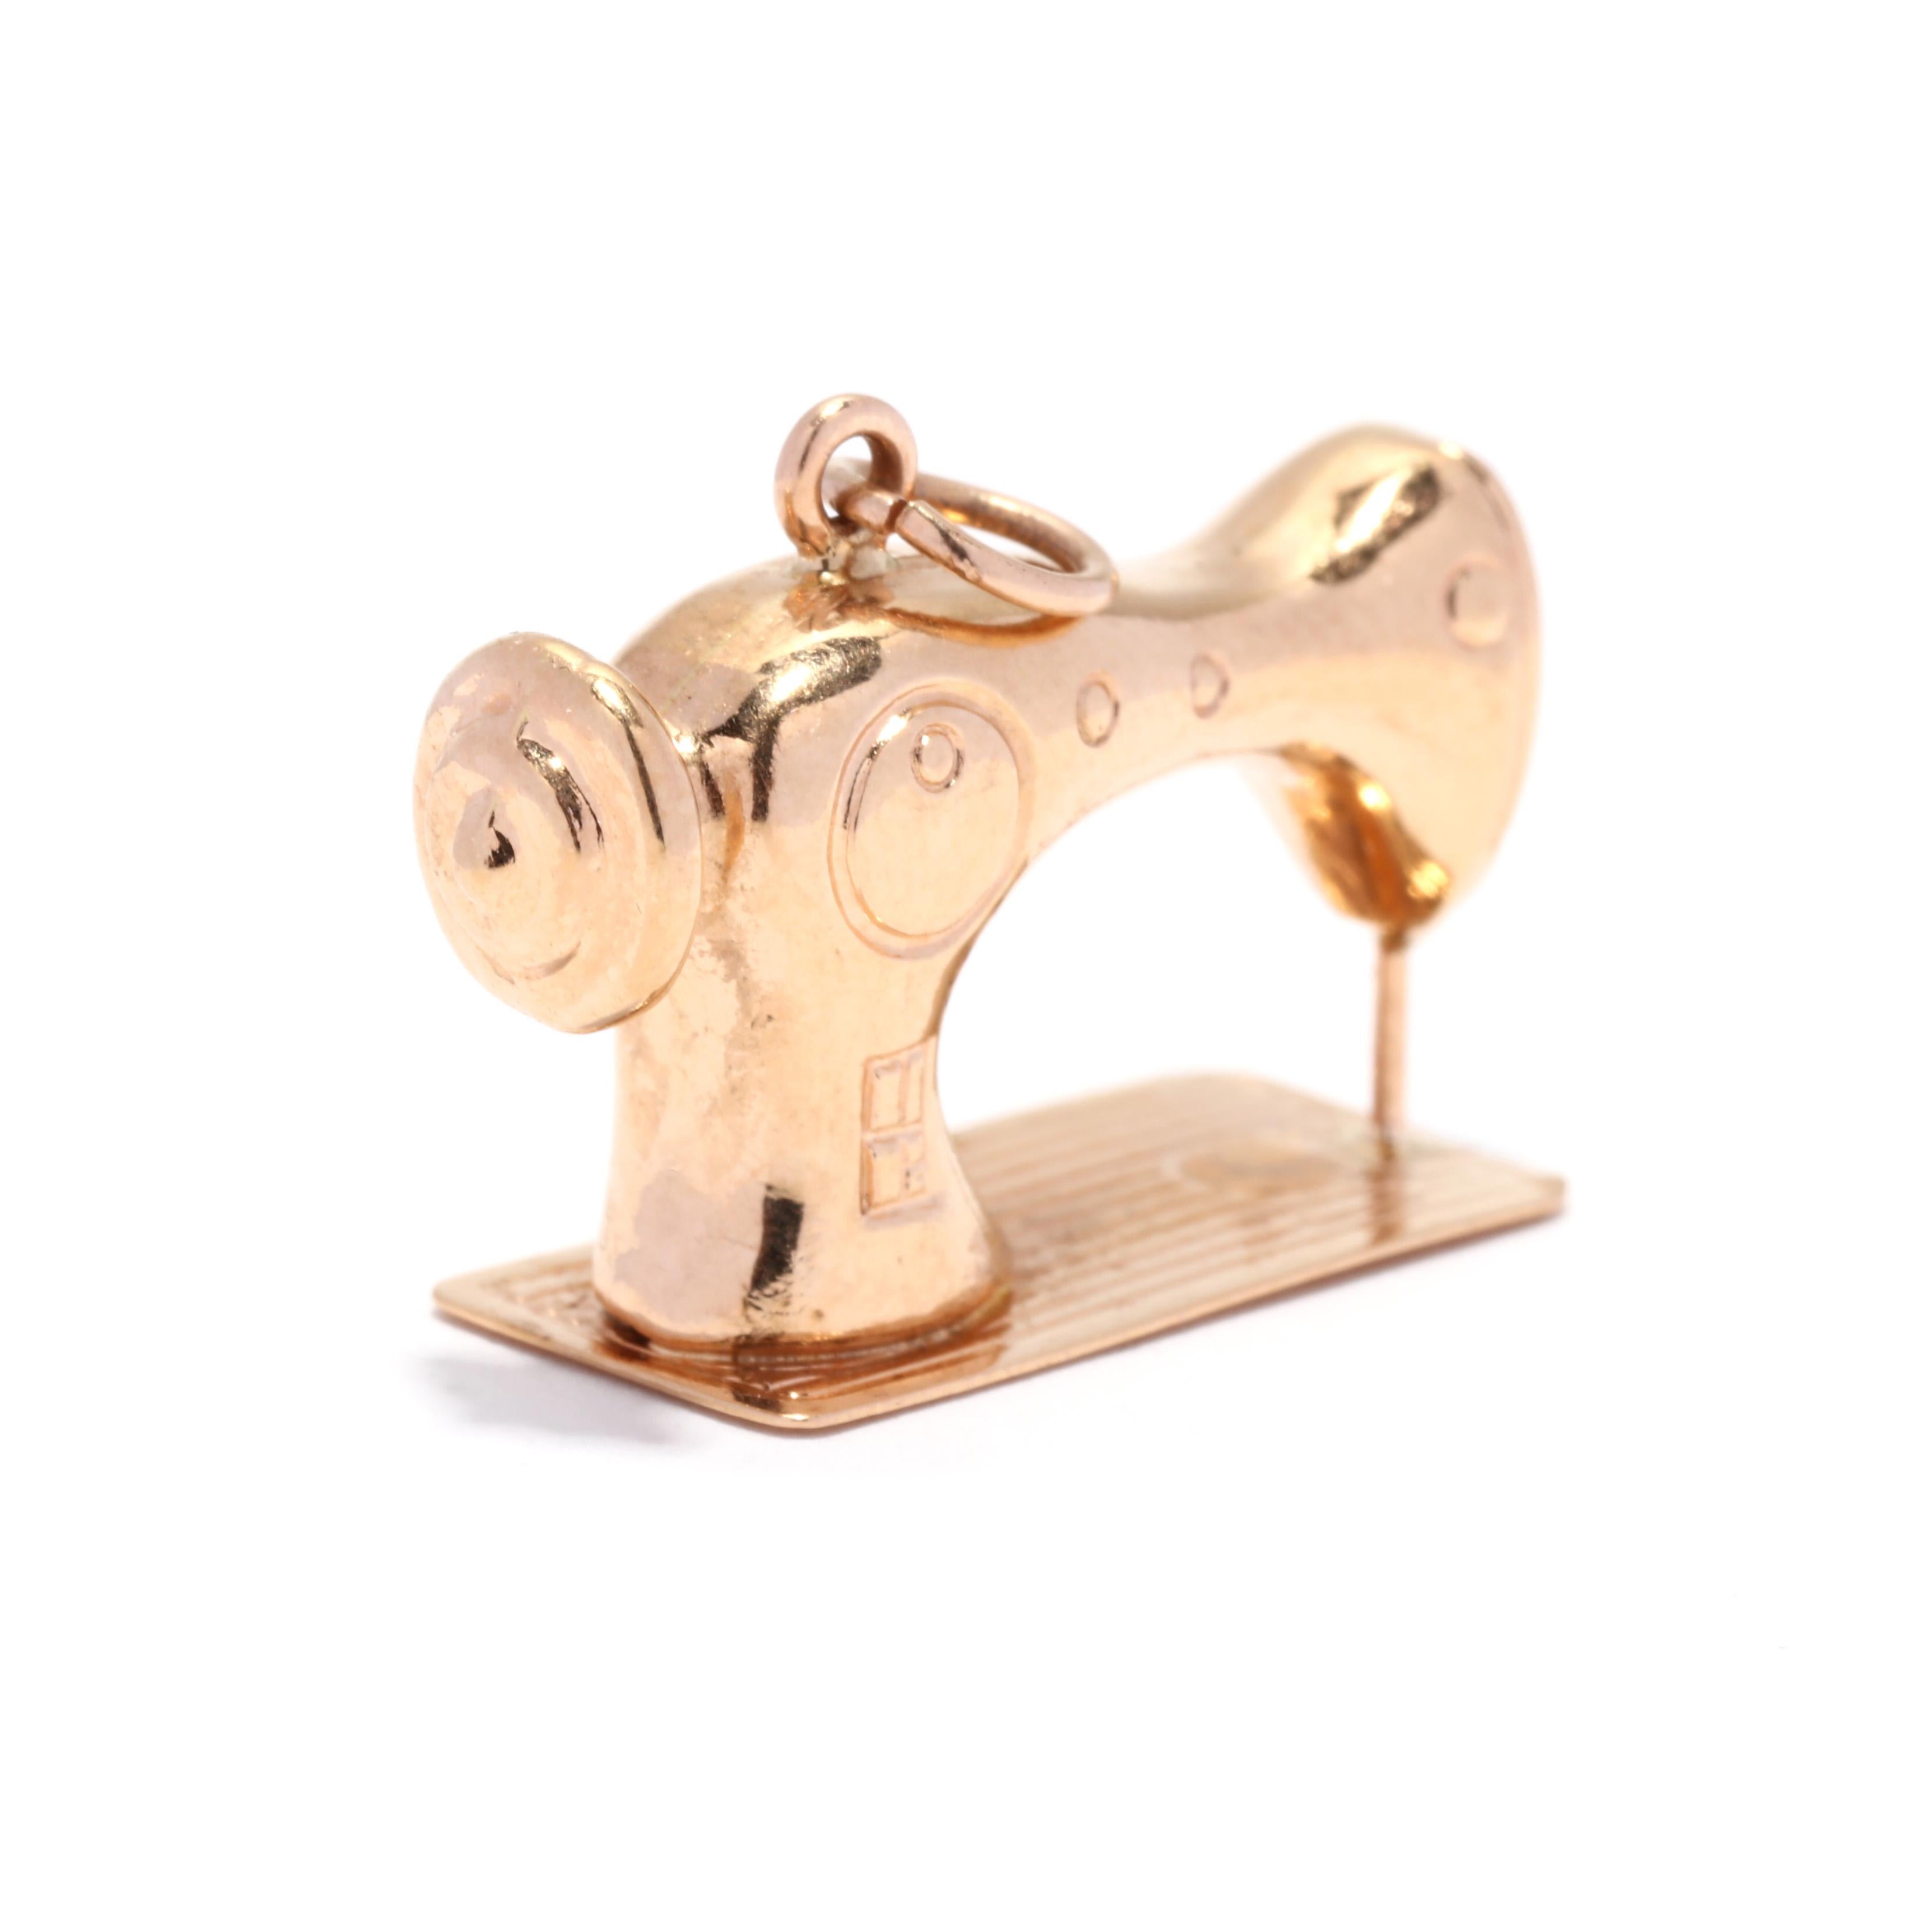 A vintage 18 karat yellow gold sewing machine charm. This large charm features a vintage sewing machine motif with engraved detailing and with a rose gold tint to the metal.

Length: 1 in.

Width: 3/4 in.

Weight: 2.2 dwts. / 3.42 grams

Stamps: 750